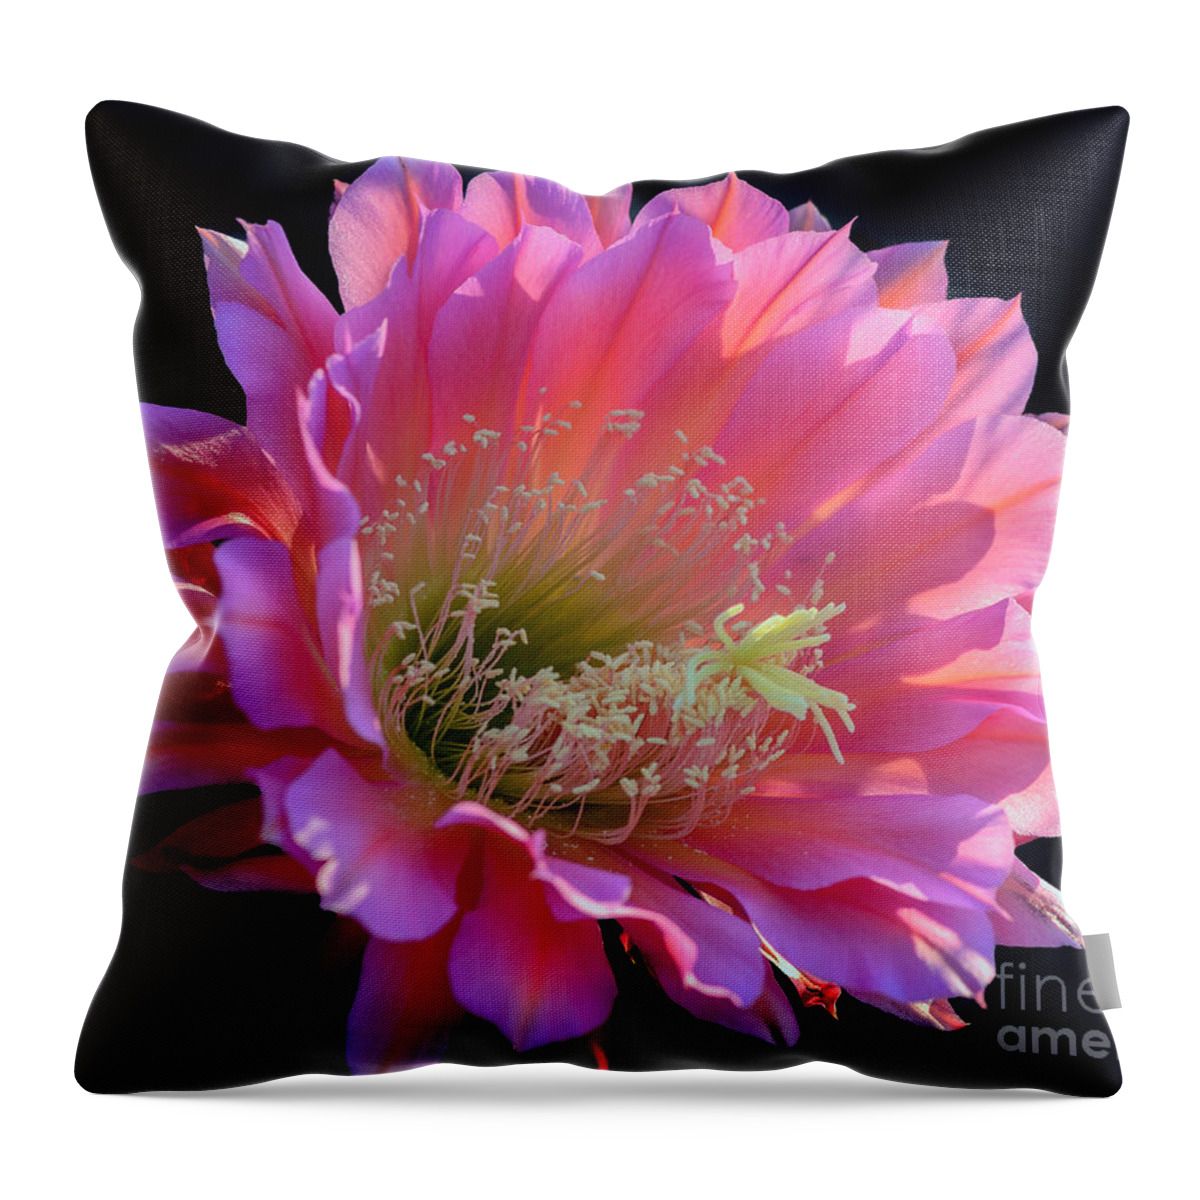 Pink Cactus Flower Throw Pillow featuring the photograph Pink Night Blooming Cactus Flower by Tamara Becker